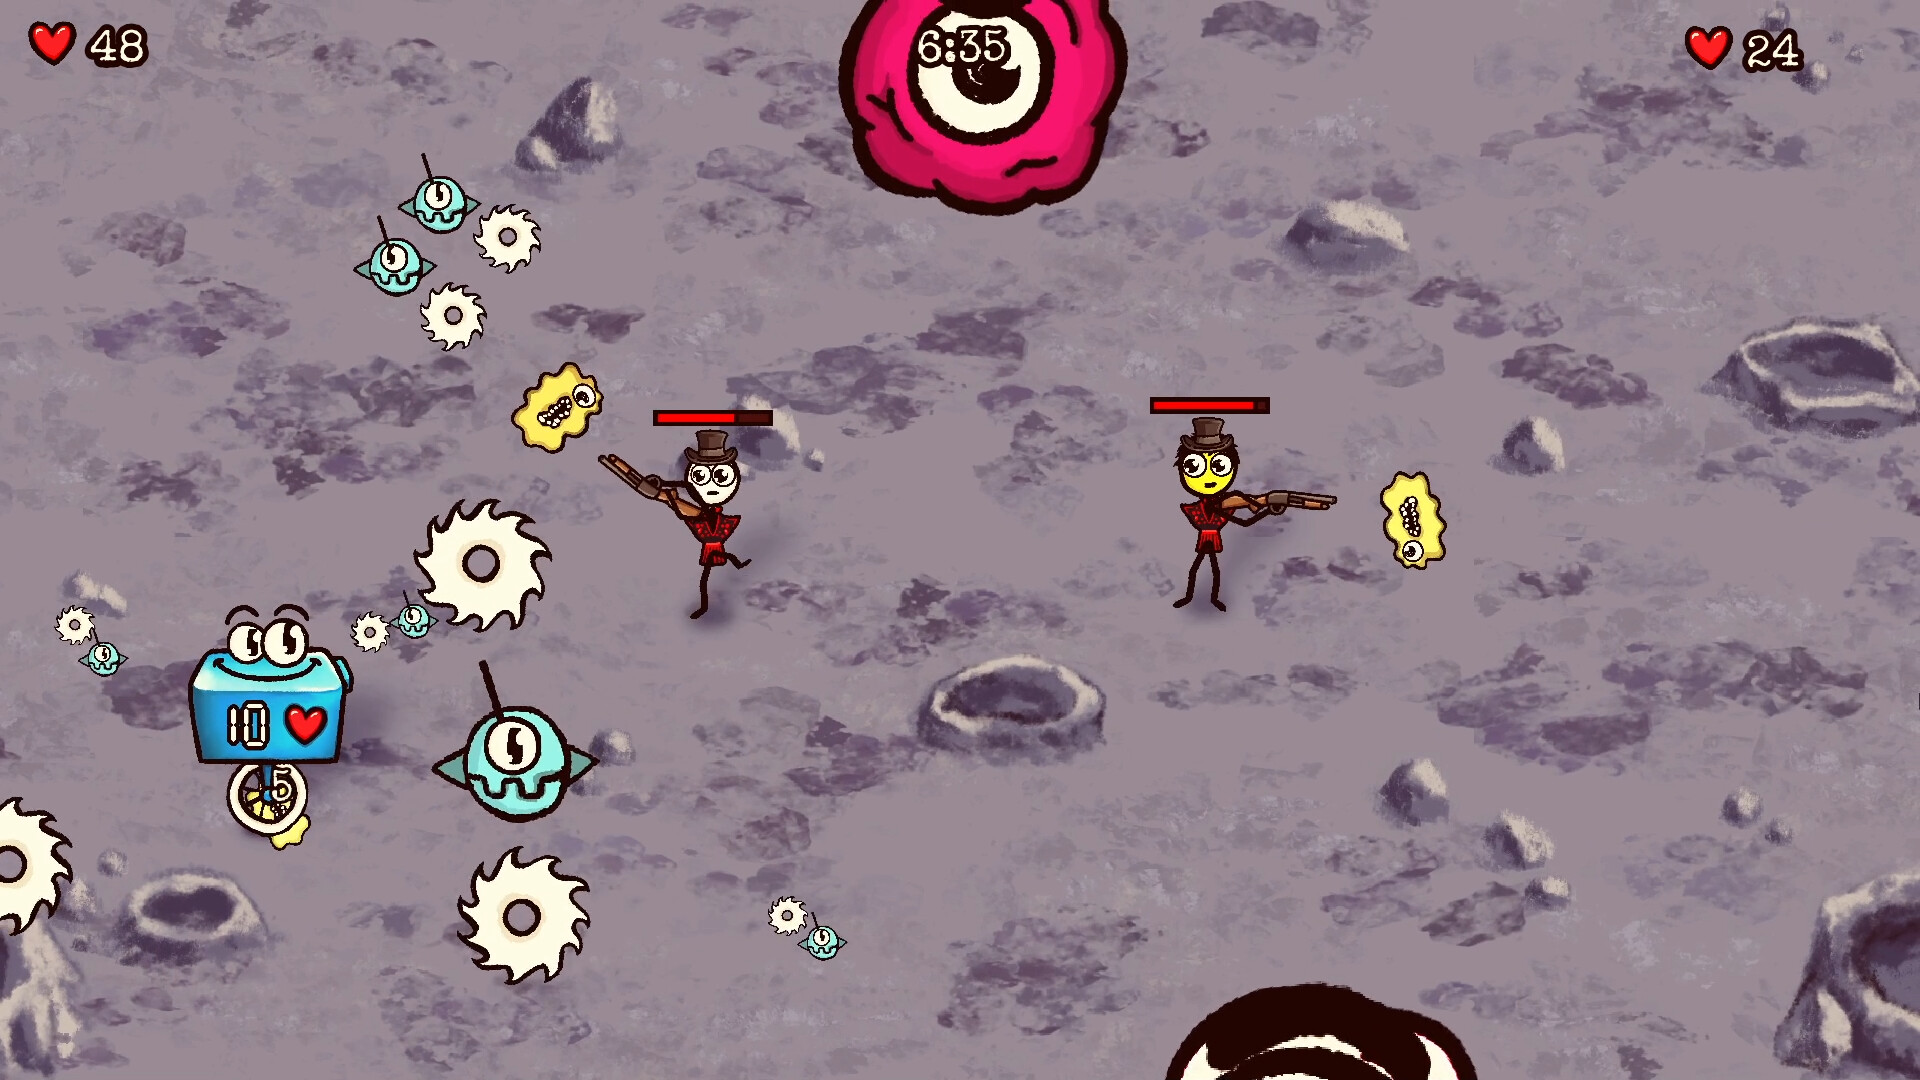 SUPER KILL-BOI 9000 - Play Online for Free!